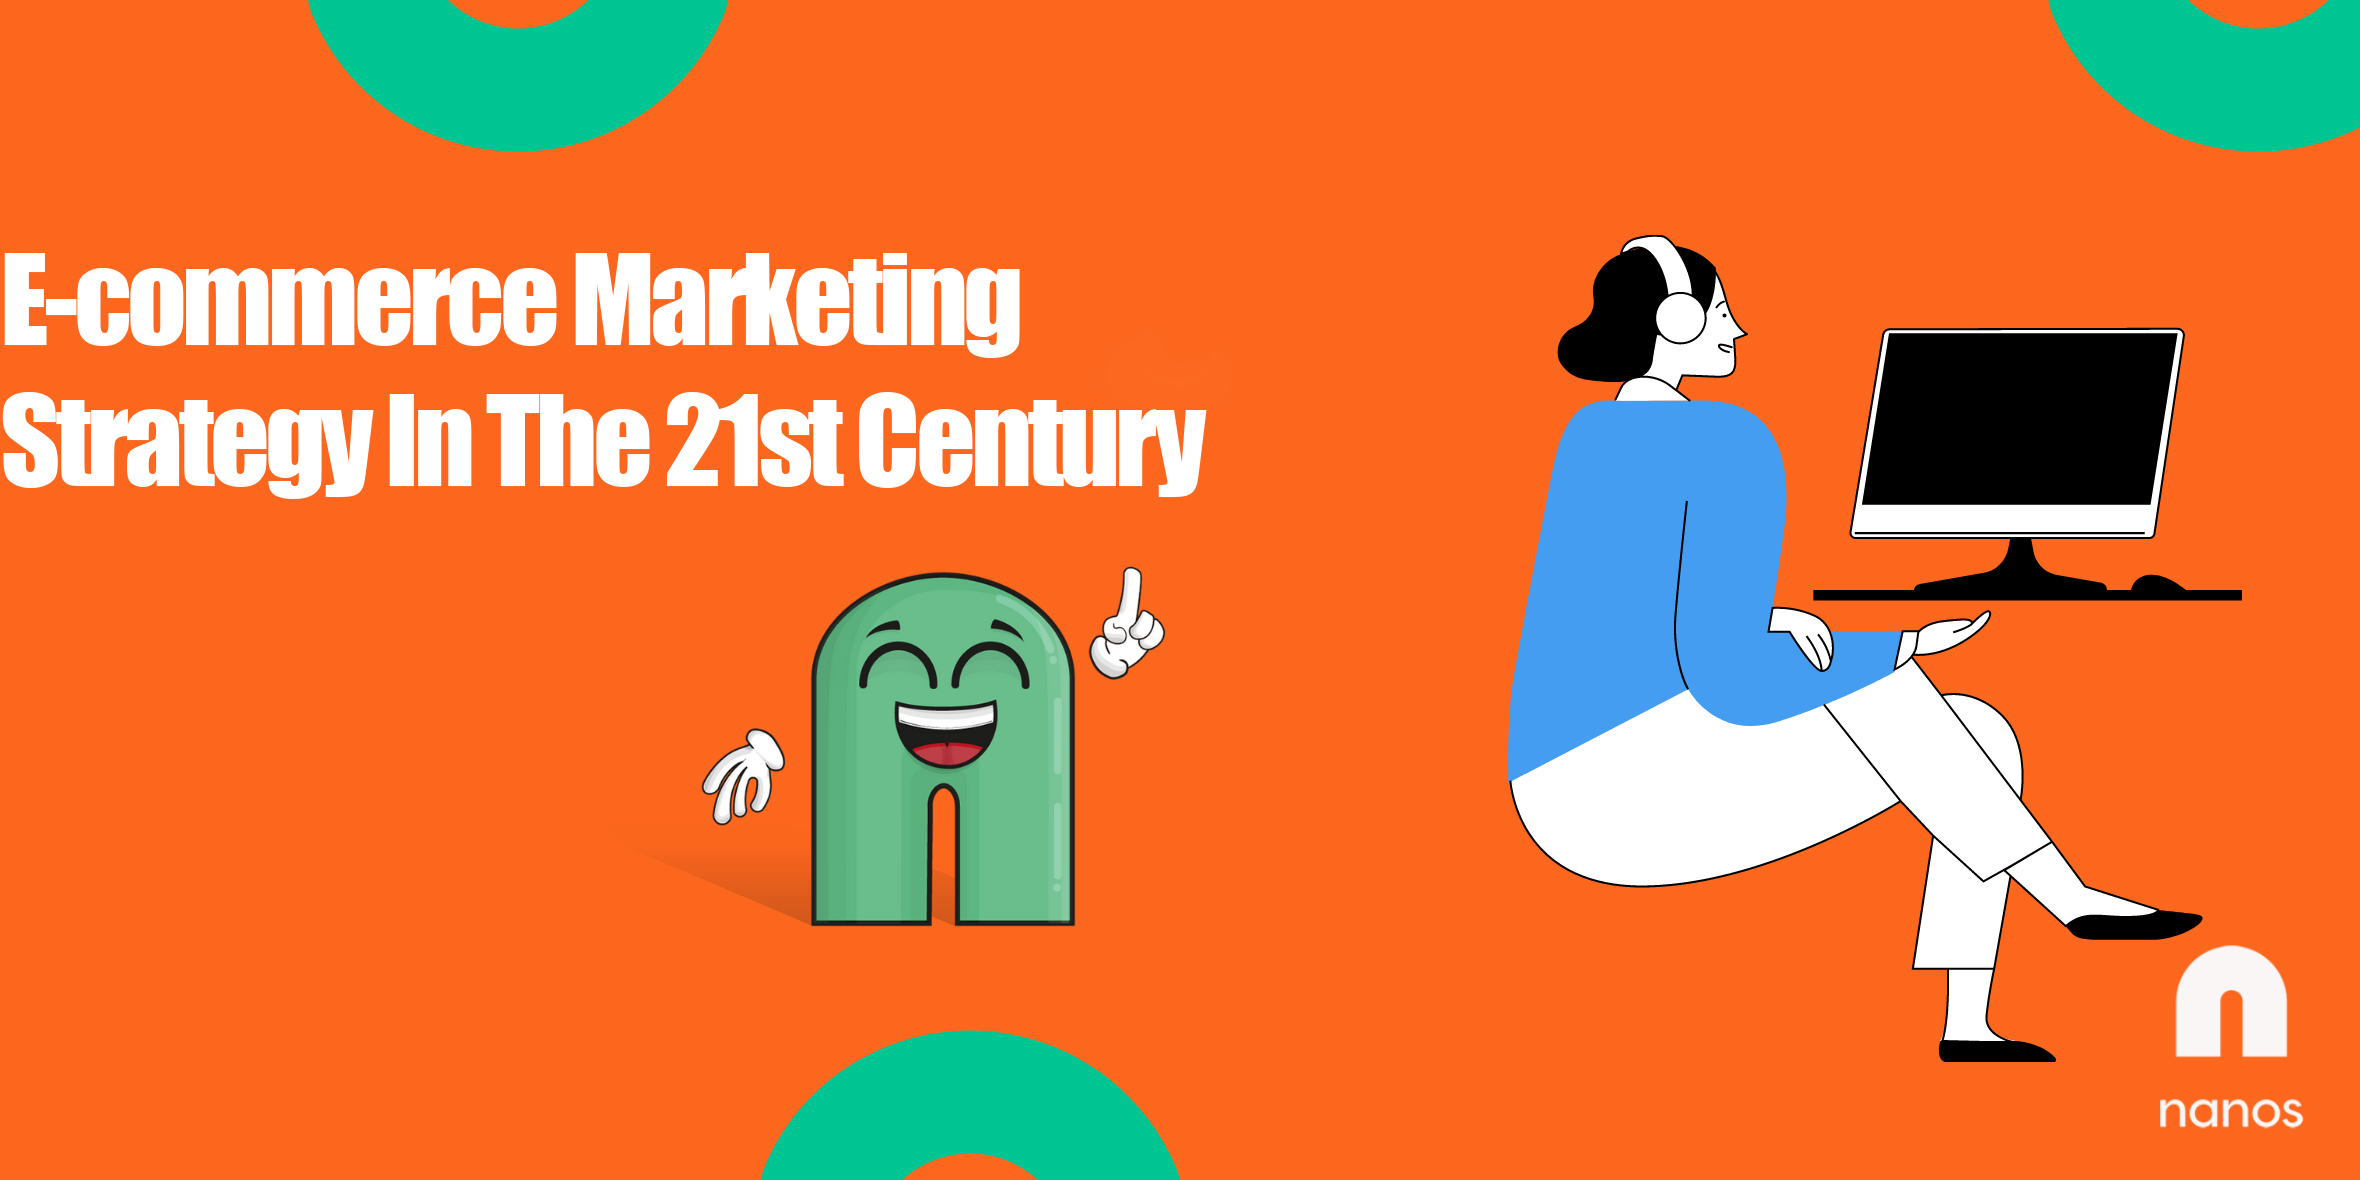 E-commerce Marketing Strategy In The 21st Century